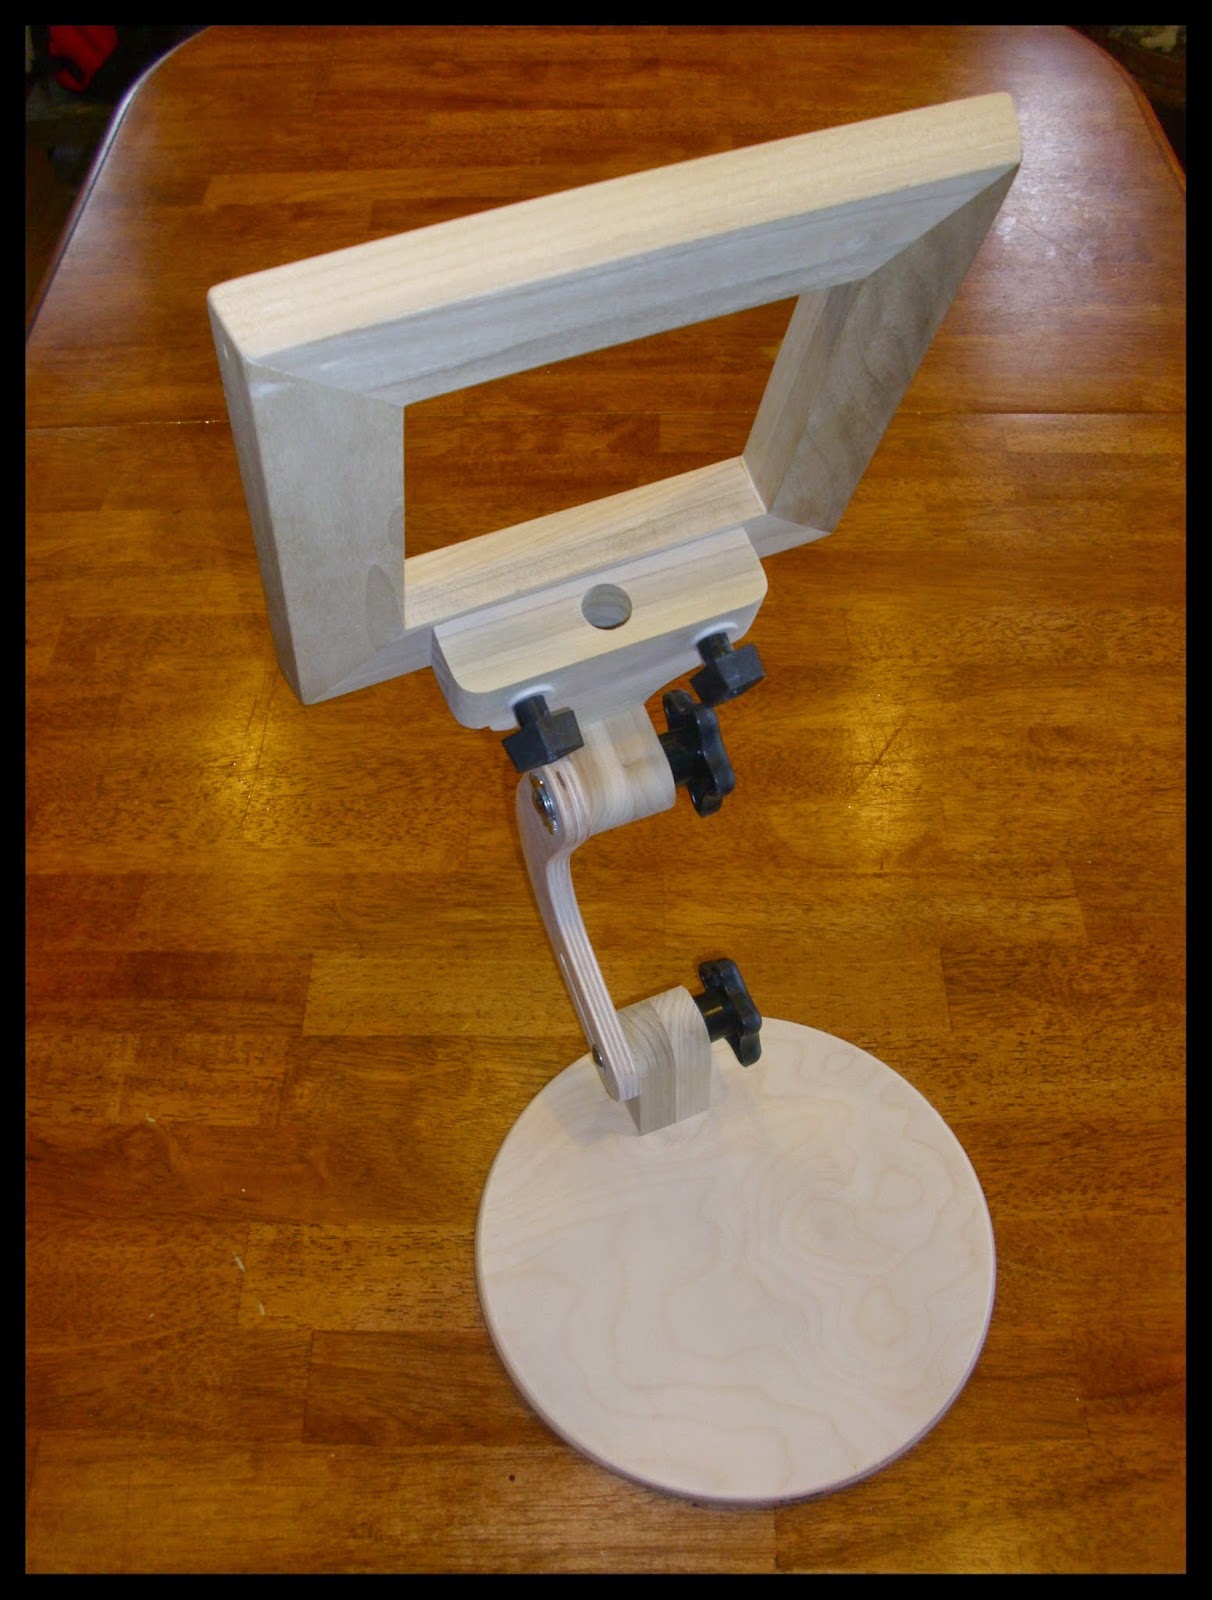 The Art of Hand Quilting - Needlearts & Rug Hooking: Directions on how to  assemble your Barnett's Laptop Hoop Floor Stand